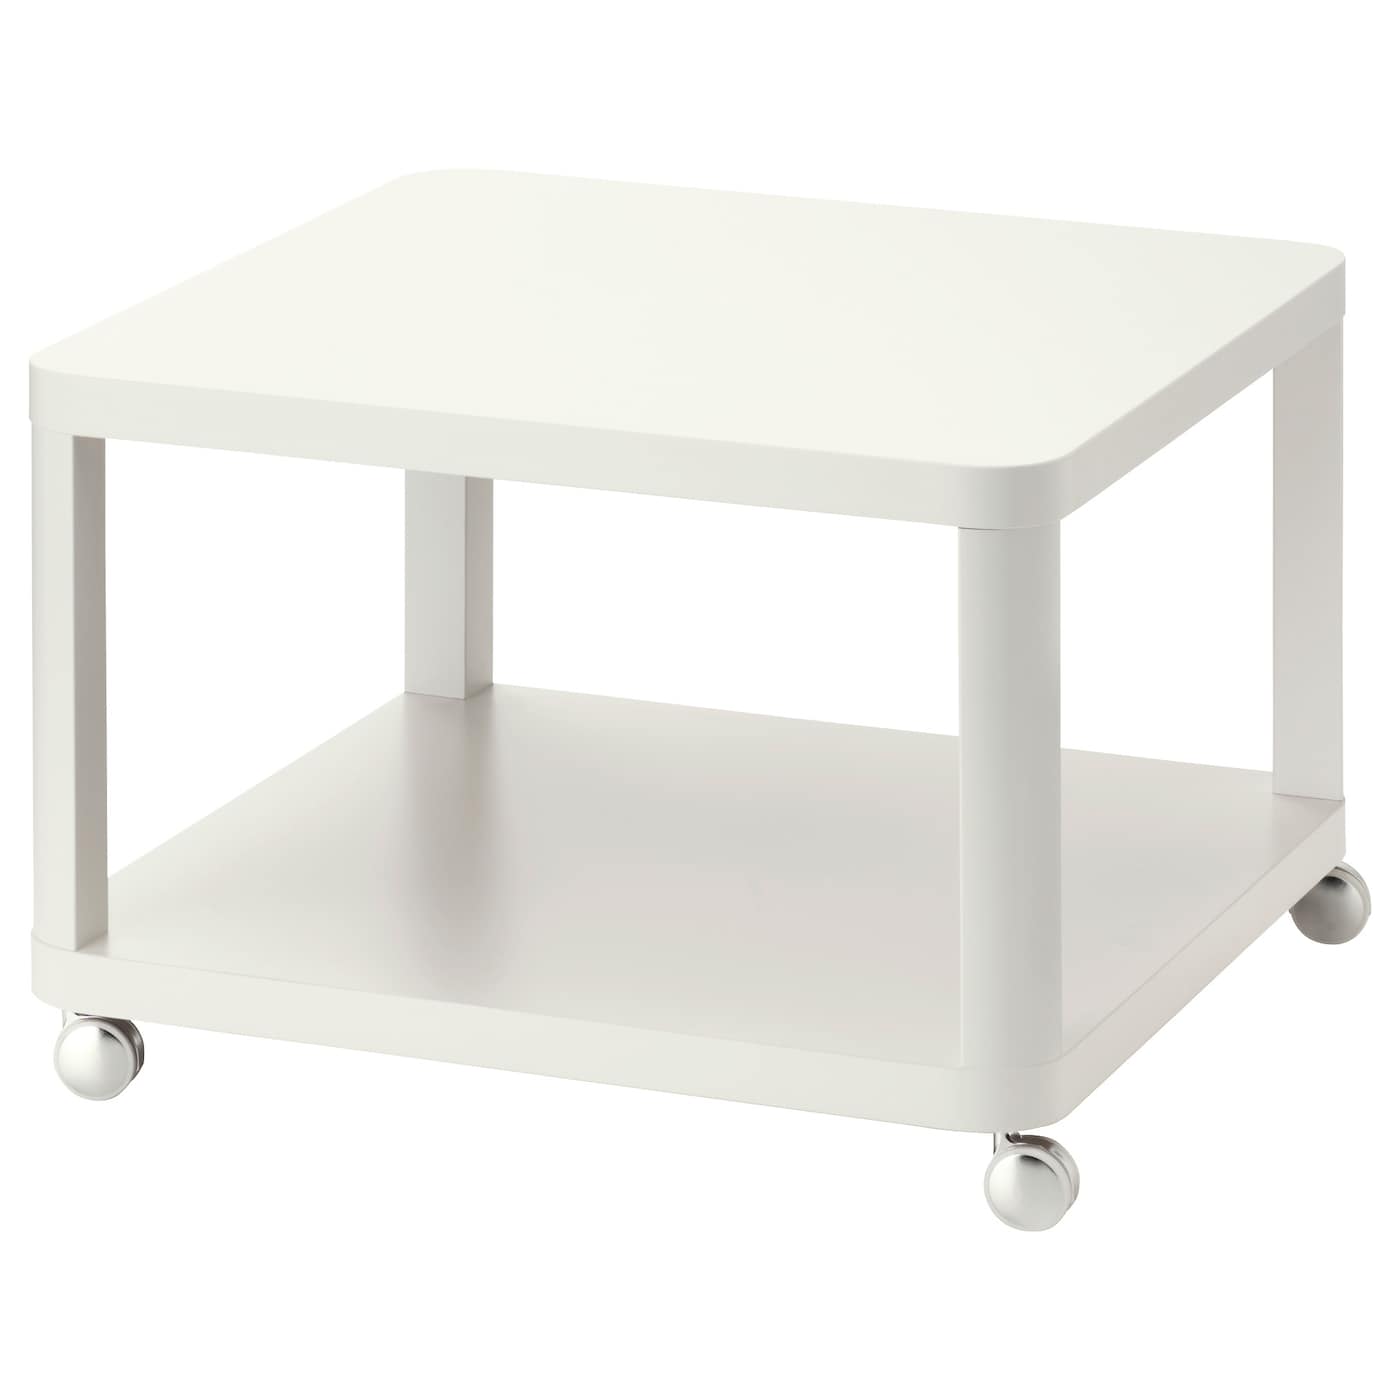 IKEA TINGBY Side Table on Casters - White - 25 1/4 x 25 1/4 $49.99